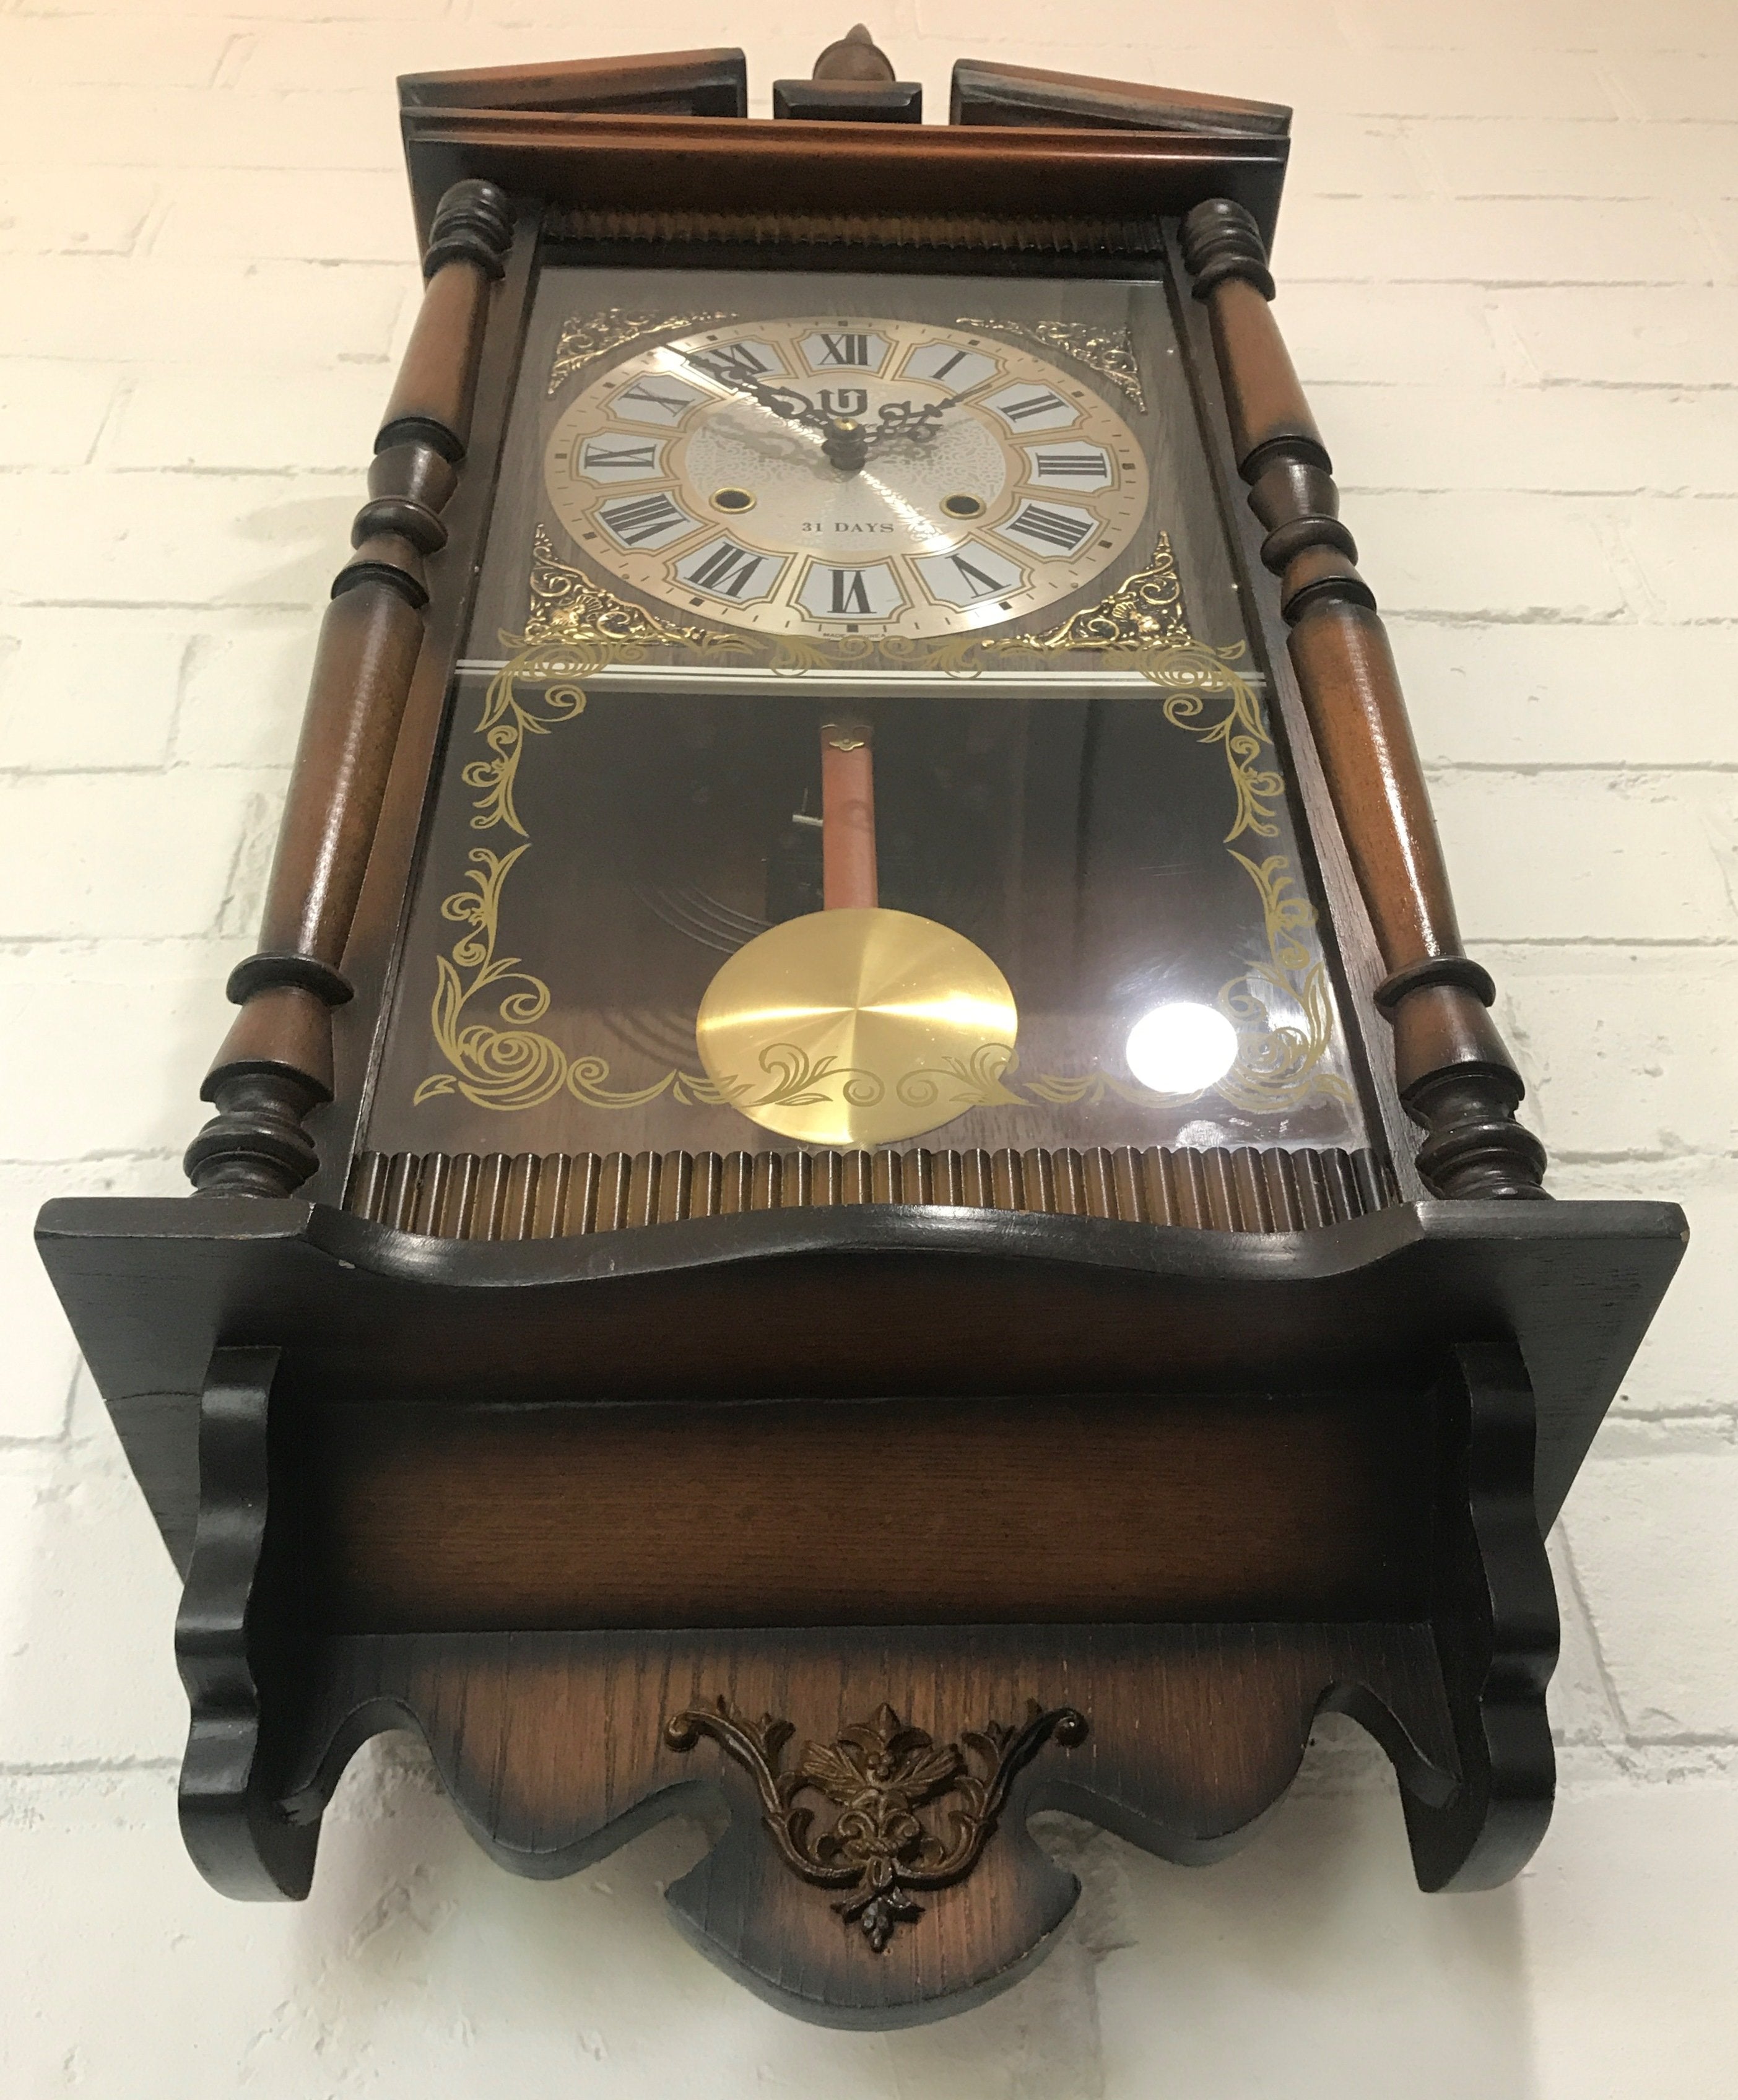 Vintage Unique Chime 31 Day Wall Clock | eXibit collection